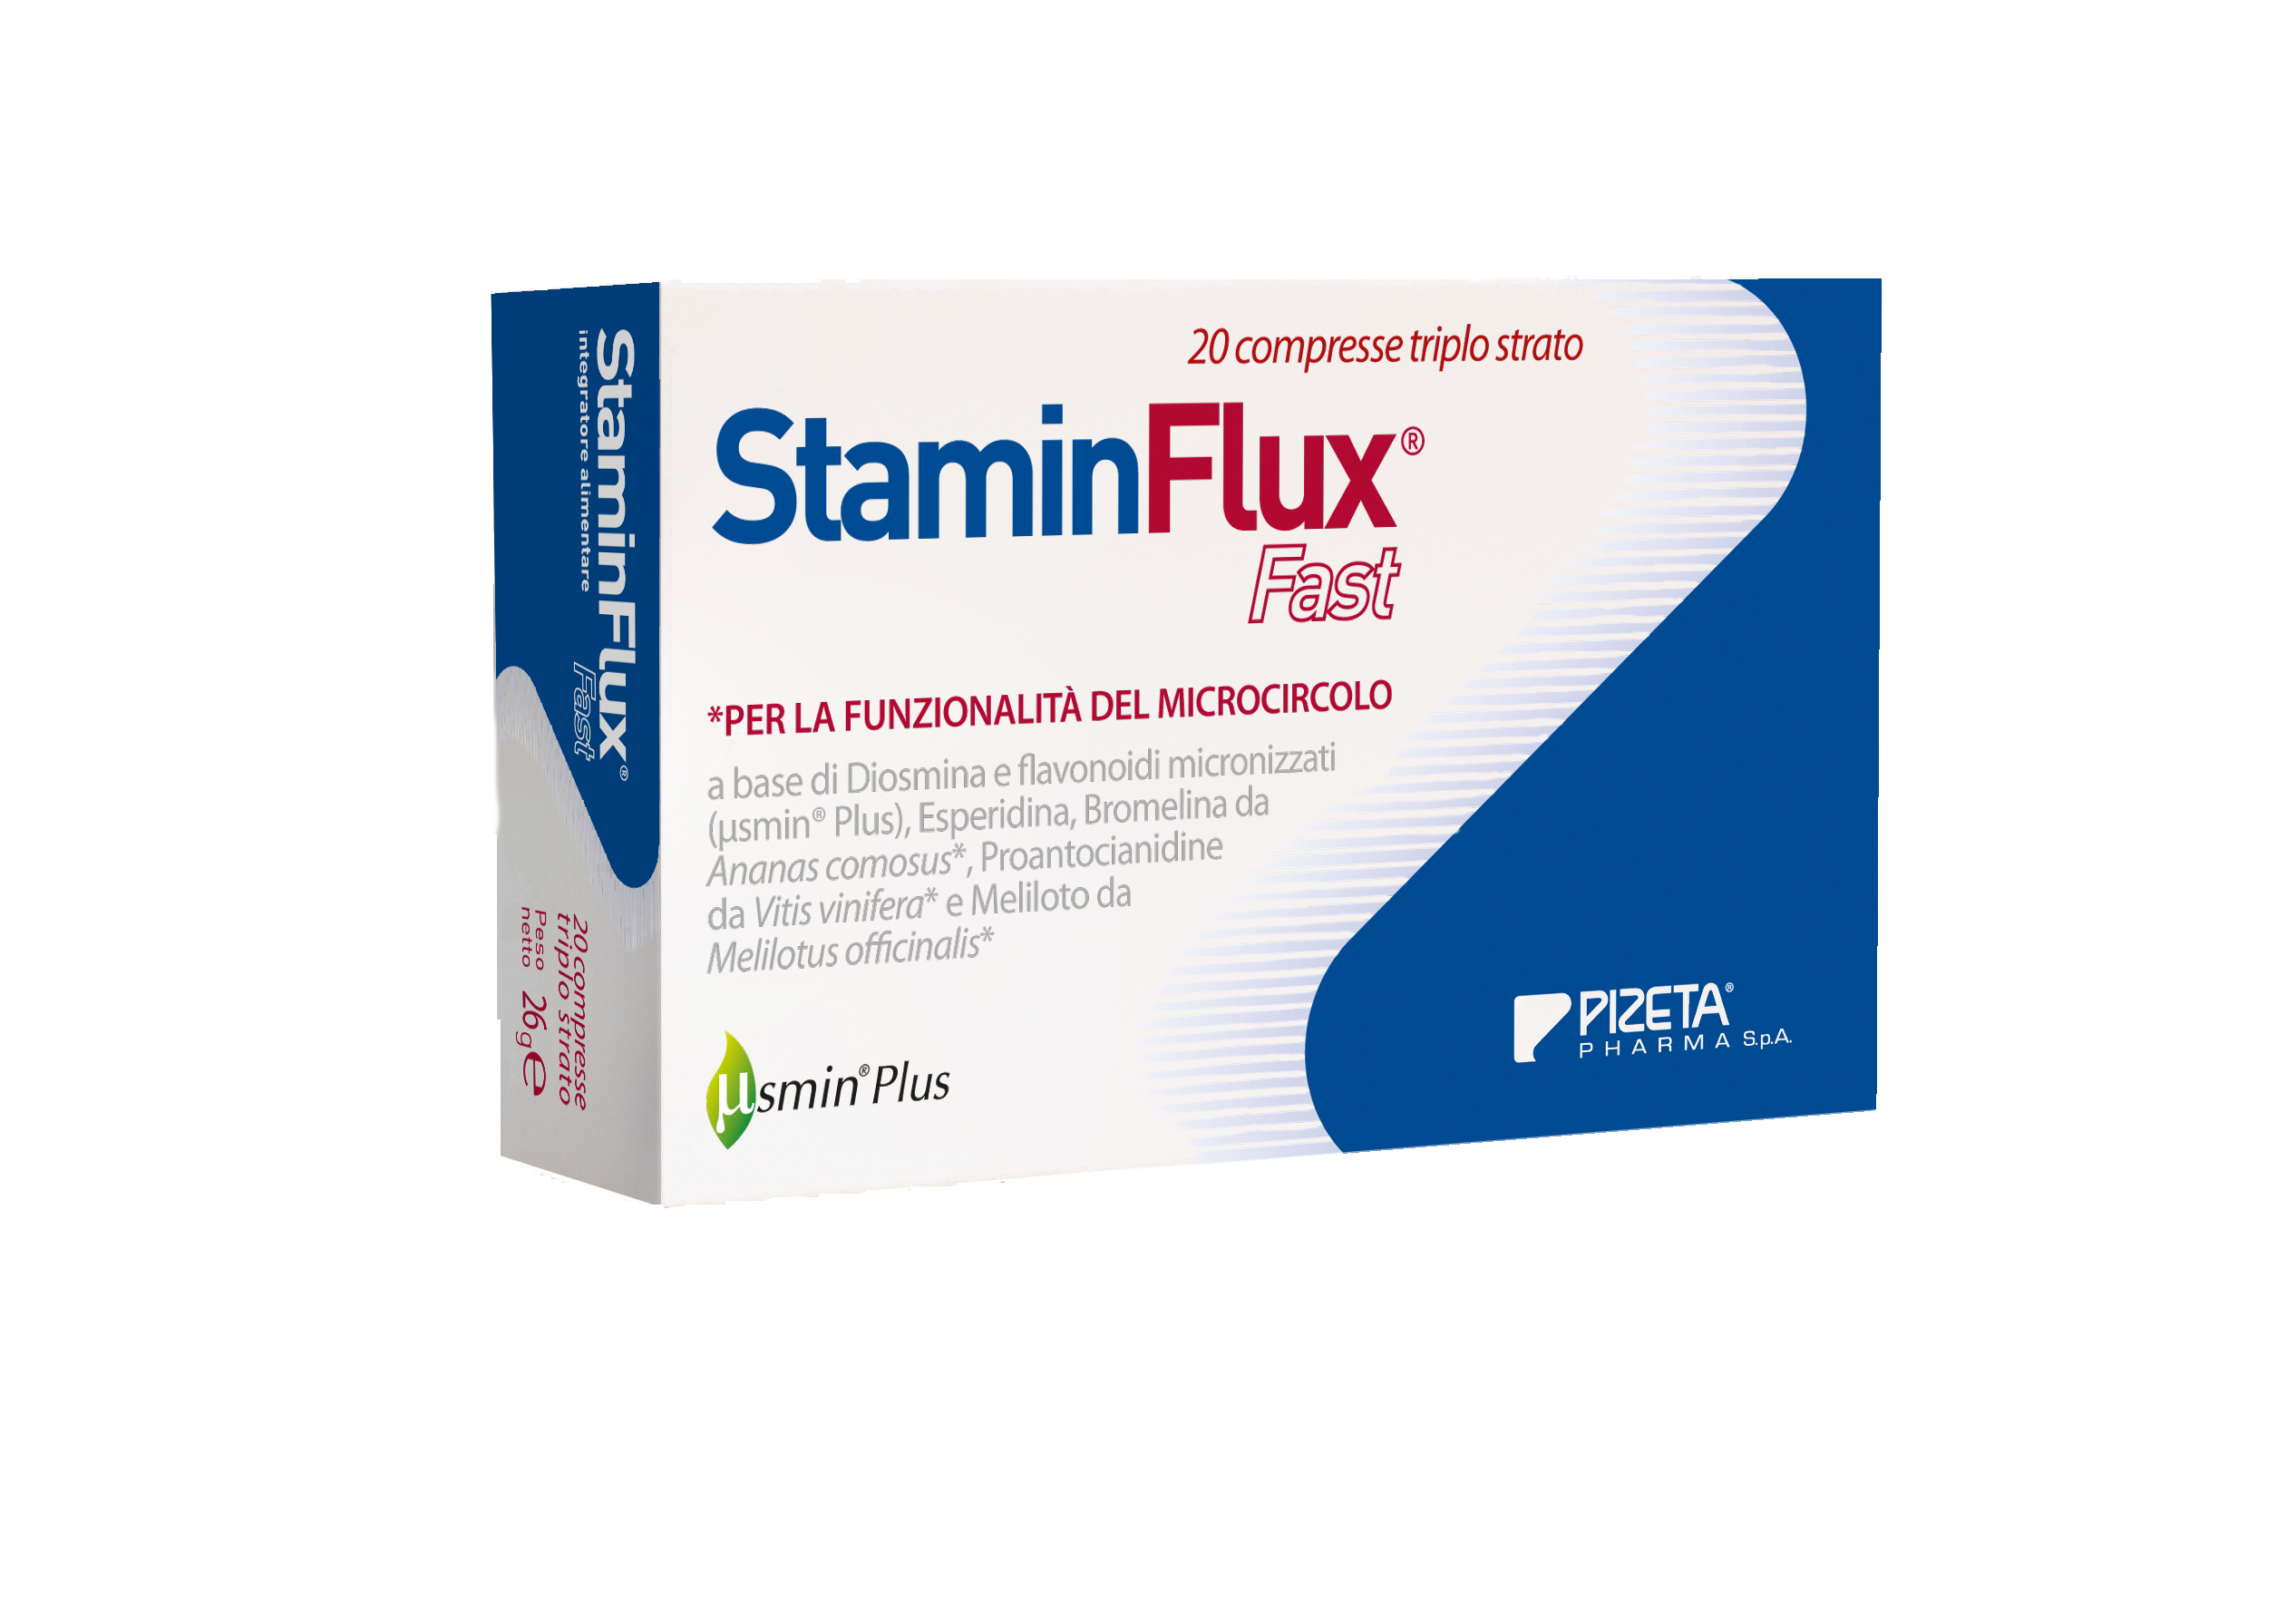 StaminFlux Fast